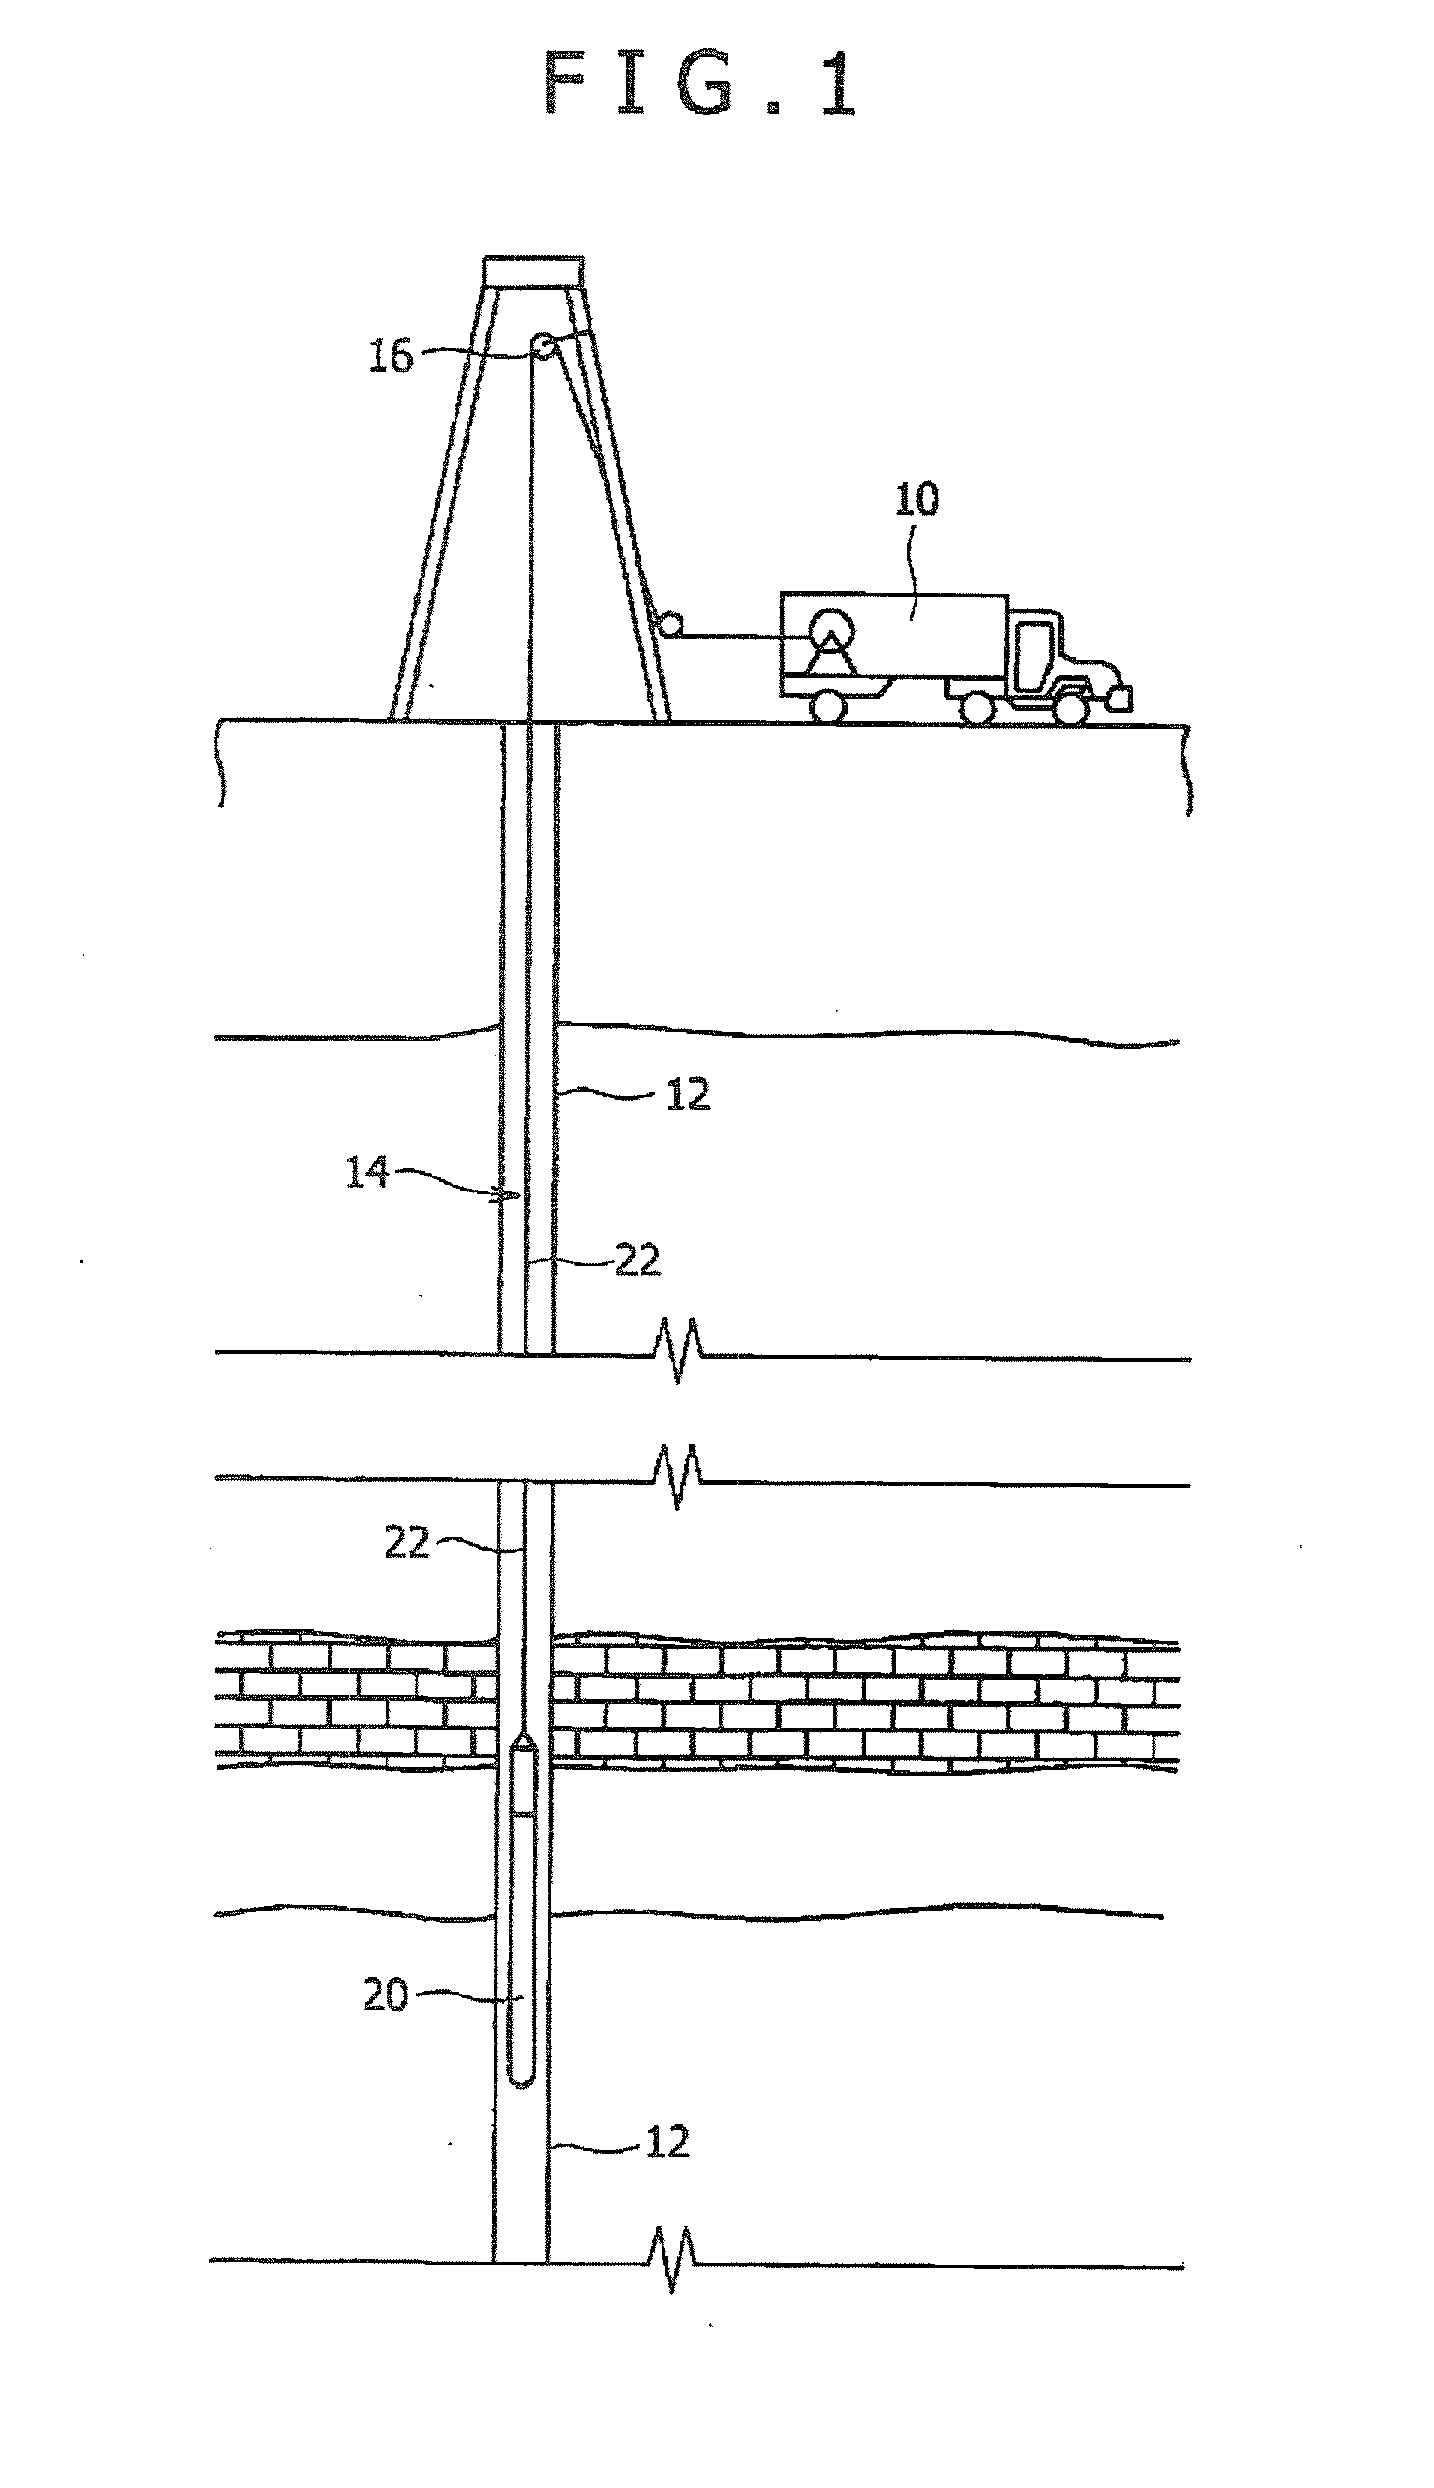 Method of downhole characterization of formation fluids, measurement controller for downhole characterization of formation fluids, and apparatus for downhole characterization of formation fluids